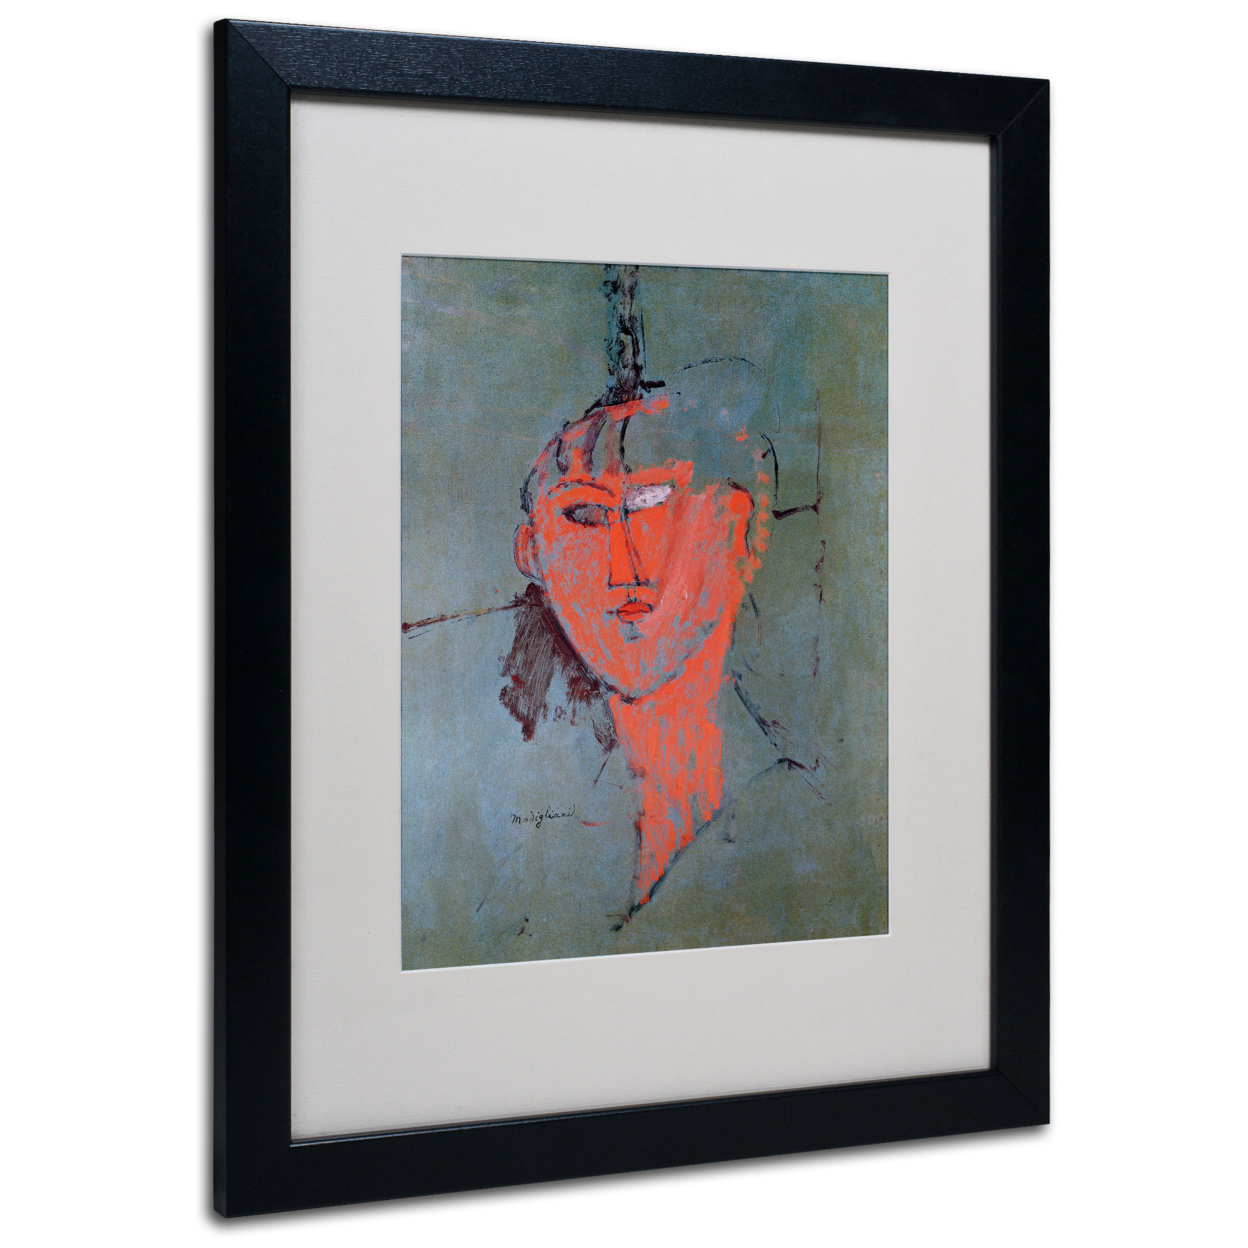 Amadeo Modigliani 'The Red Head 1915' Black Wooden Framed Art 18 X 22 Inches